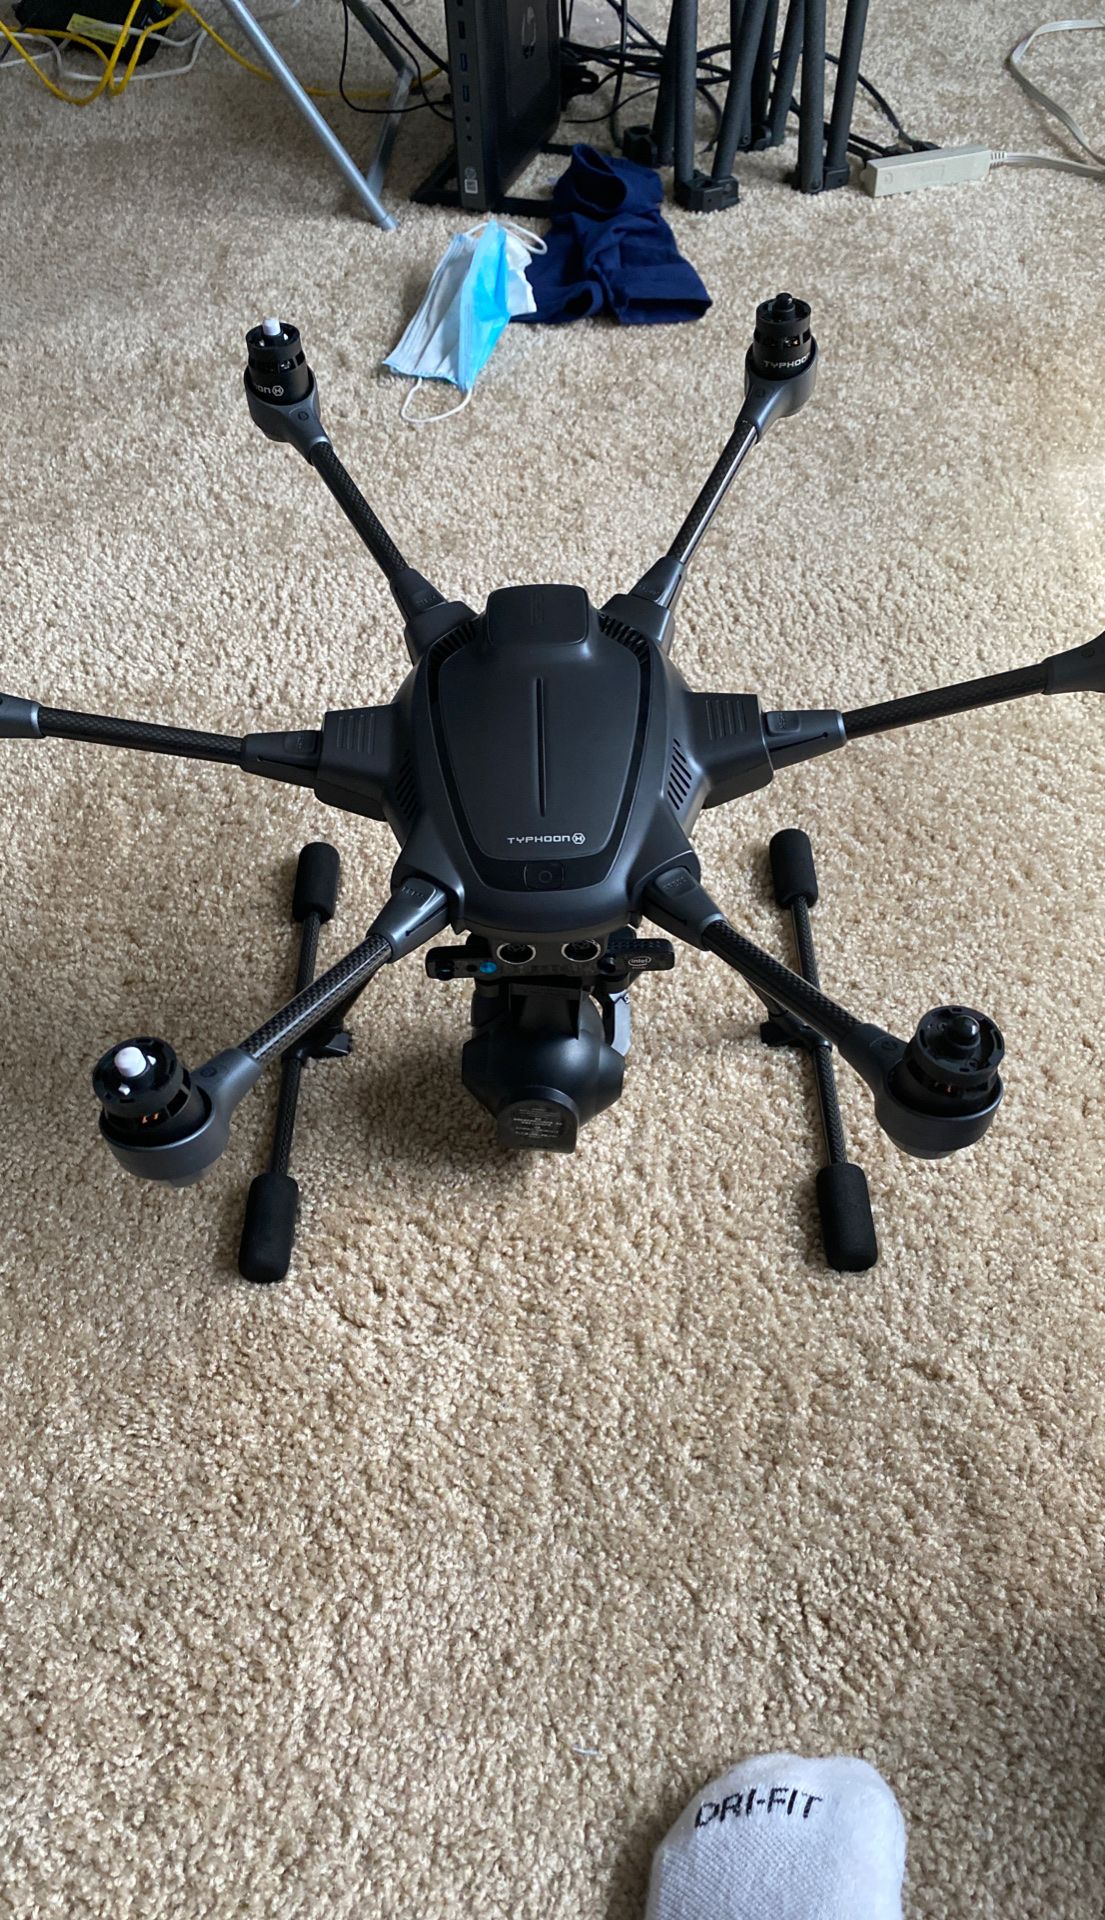 Yuneec Typhoon H With Real sense Drone